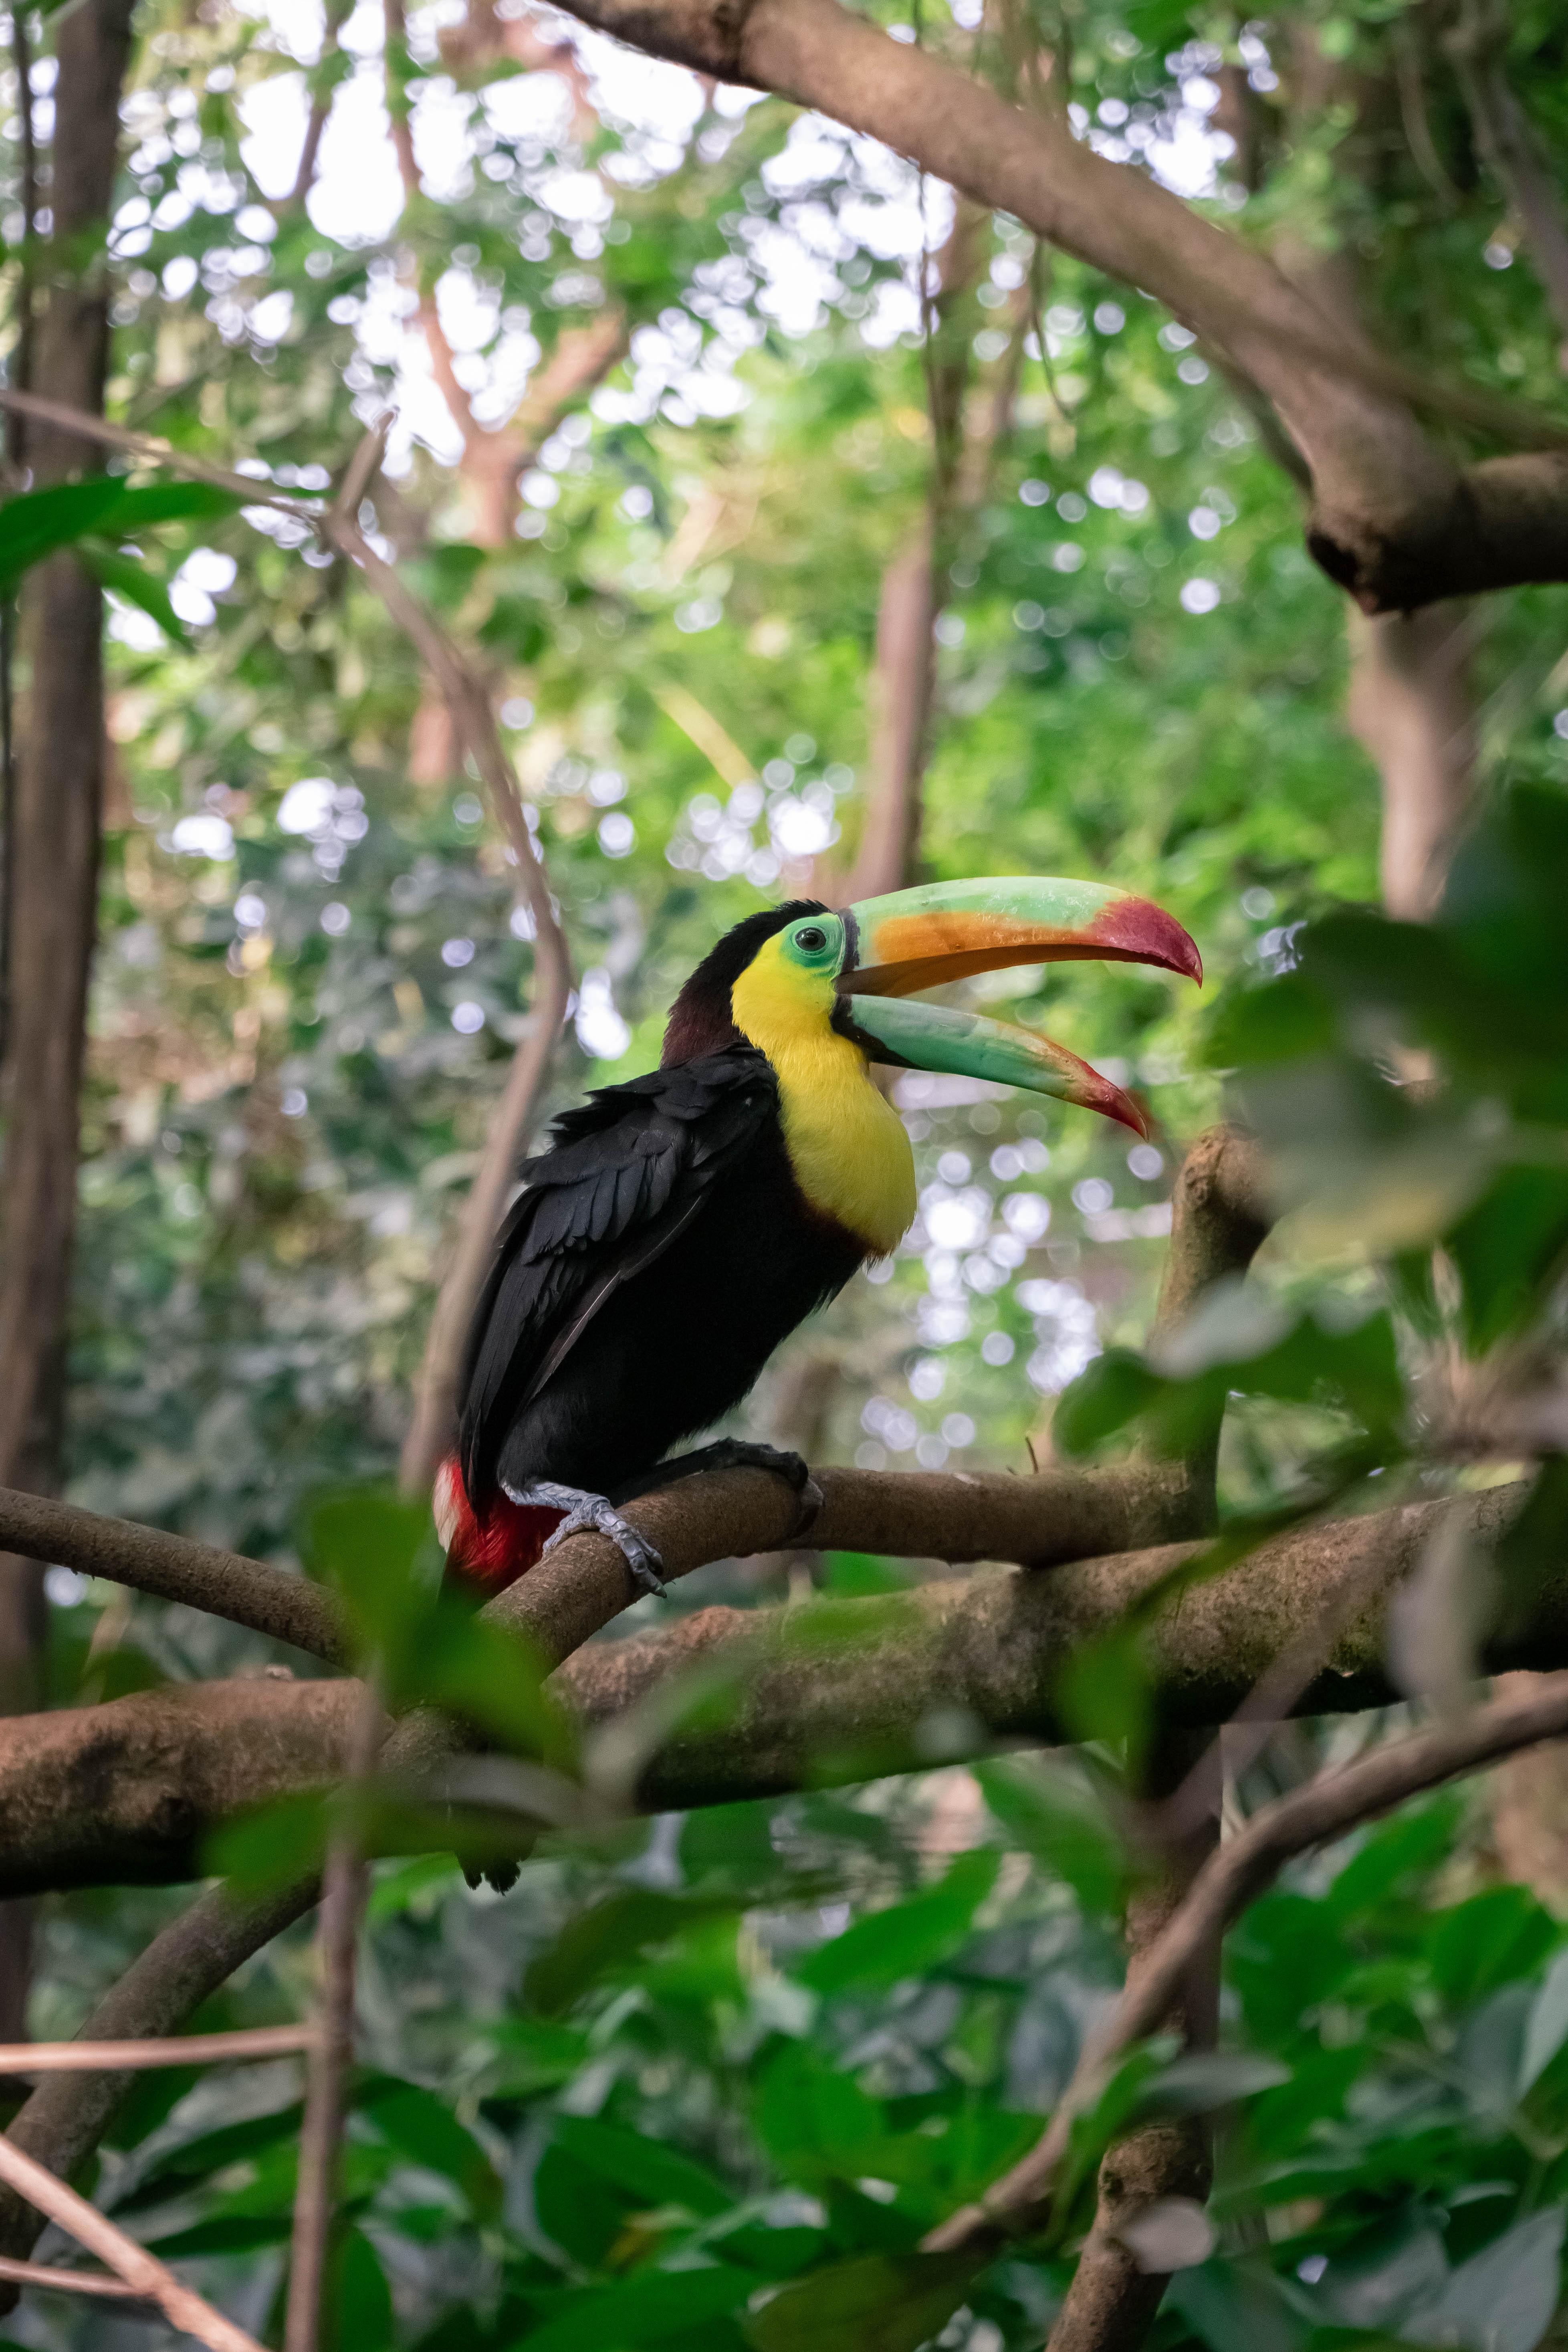 Photo of a bird in the rainforest.